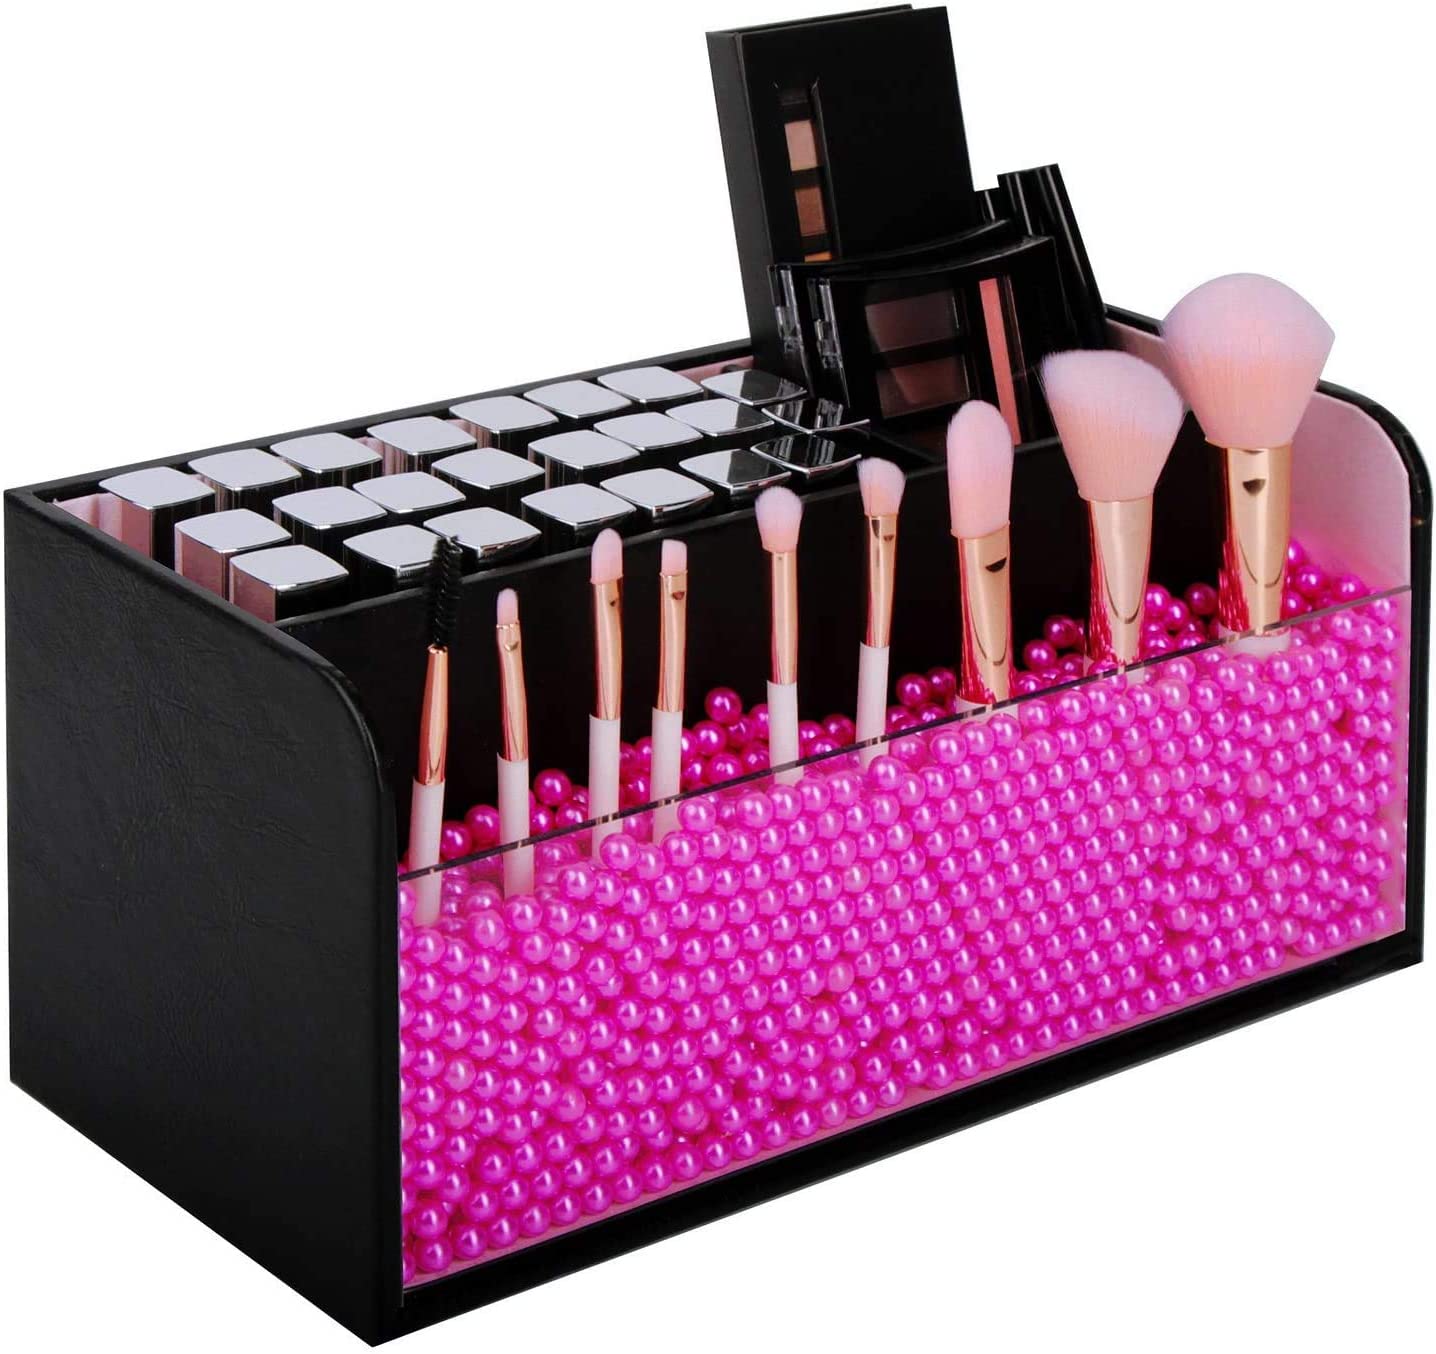 Leather Makeup Brush Cosmetic Organiser Storage Box with Pink Pearls, Acrylic Cover and 3 Compartments(Black) - SILBERSHELL